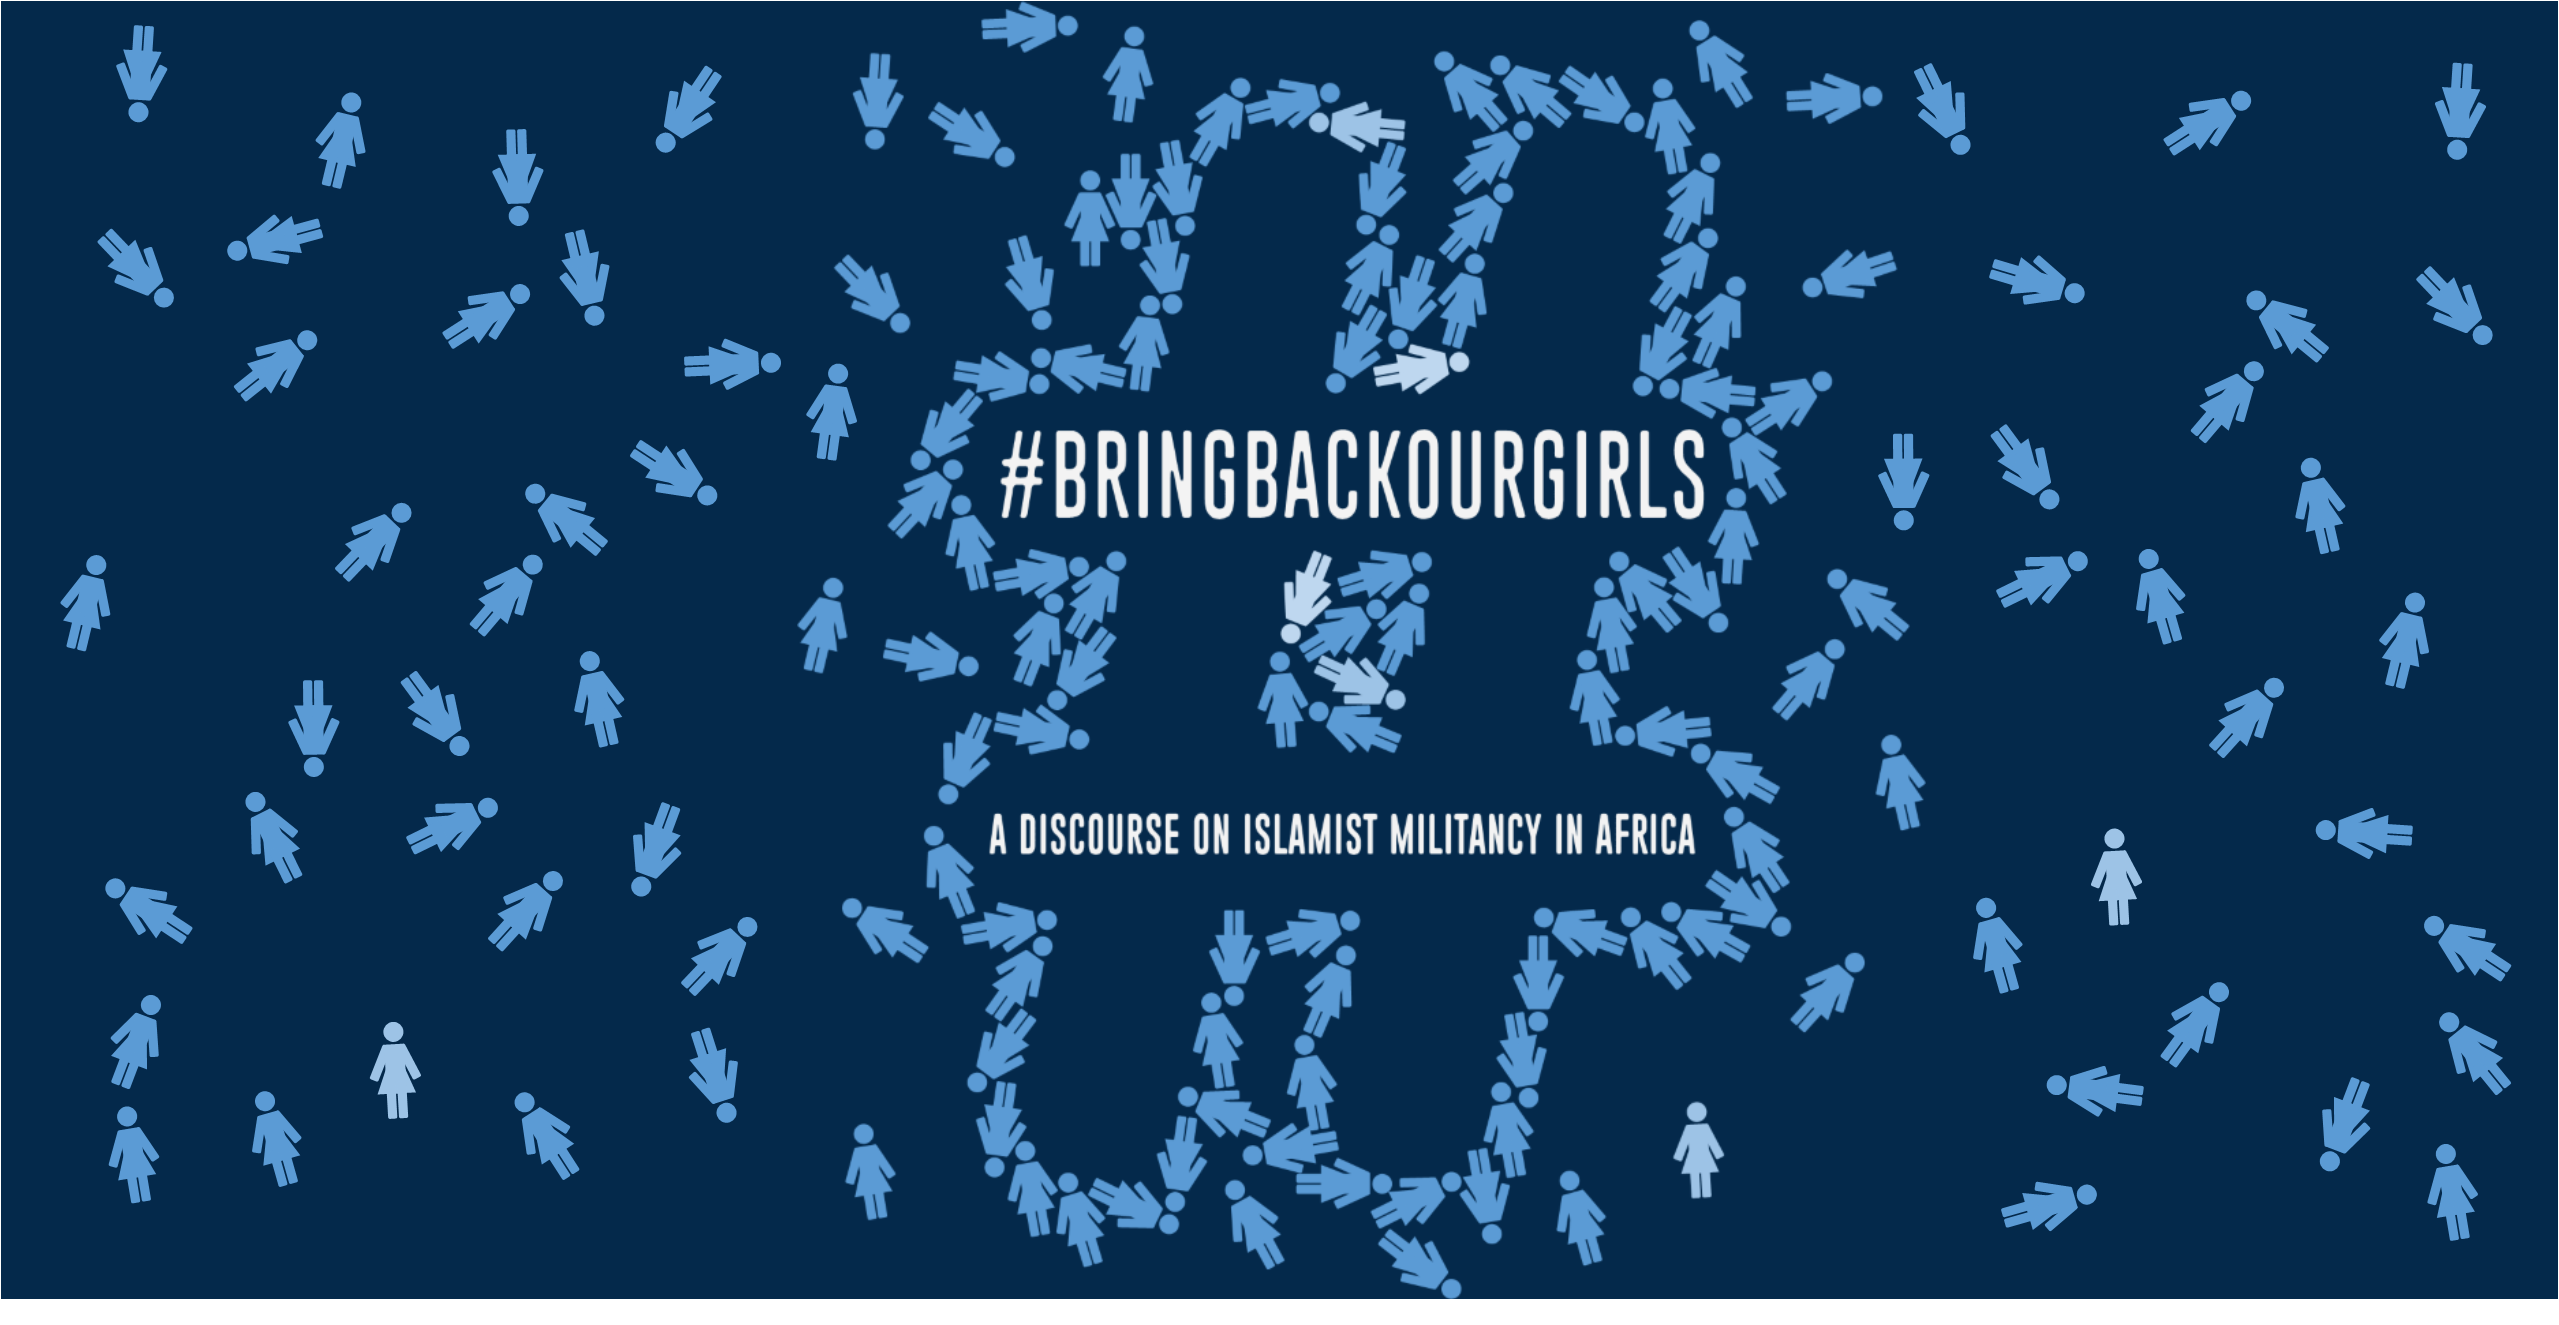 #bringbackourgirls: A discourse on Islamist militancy in Africa